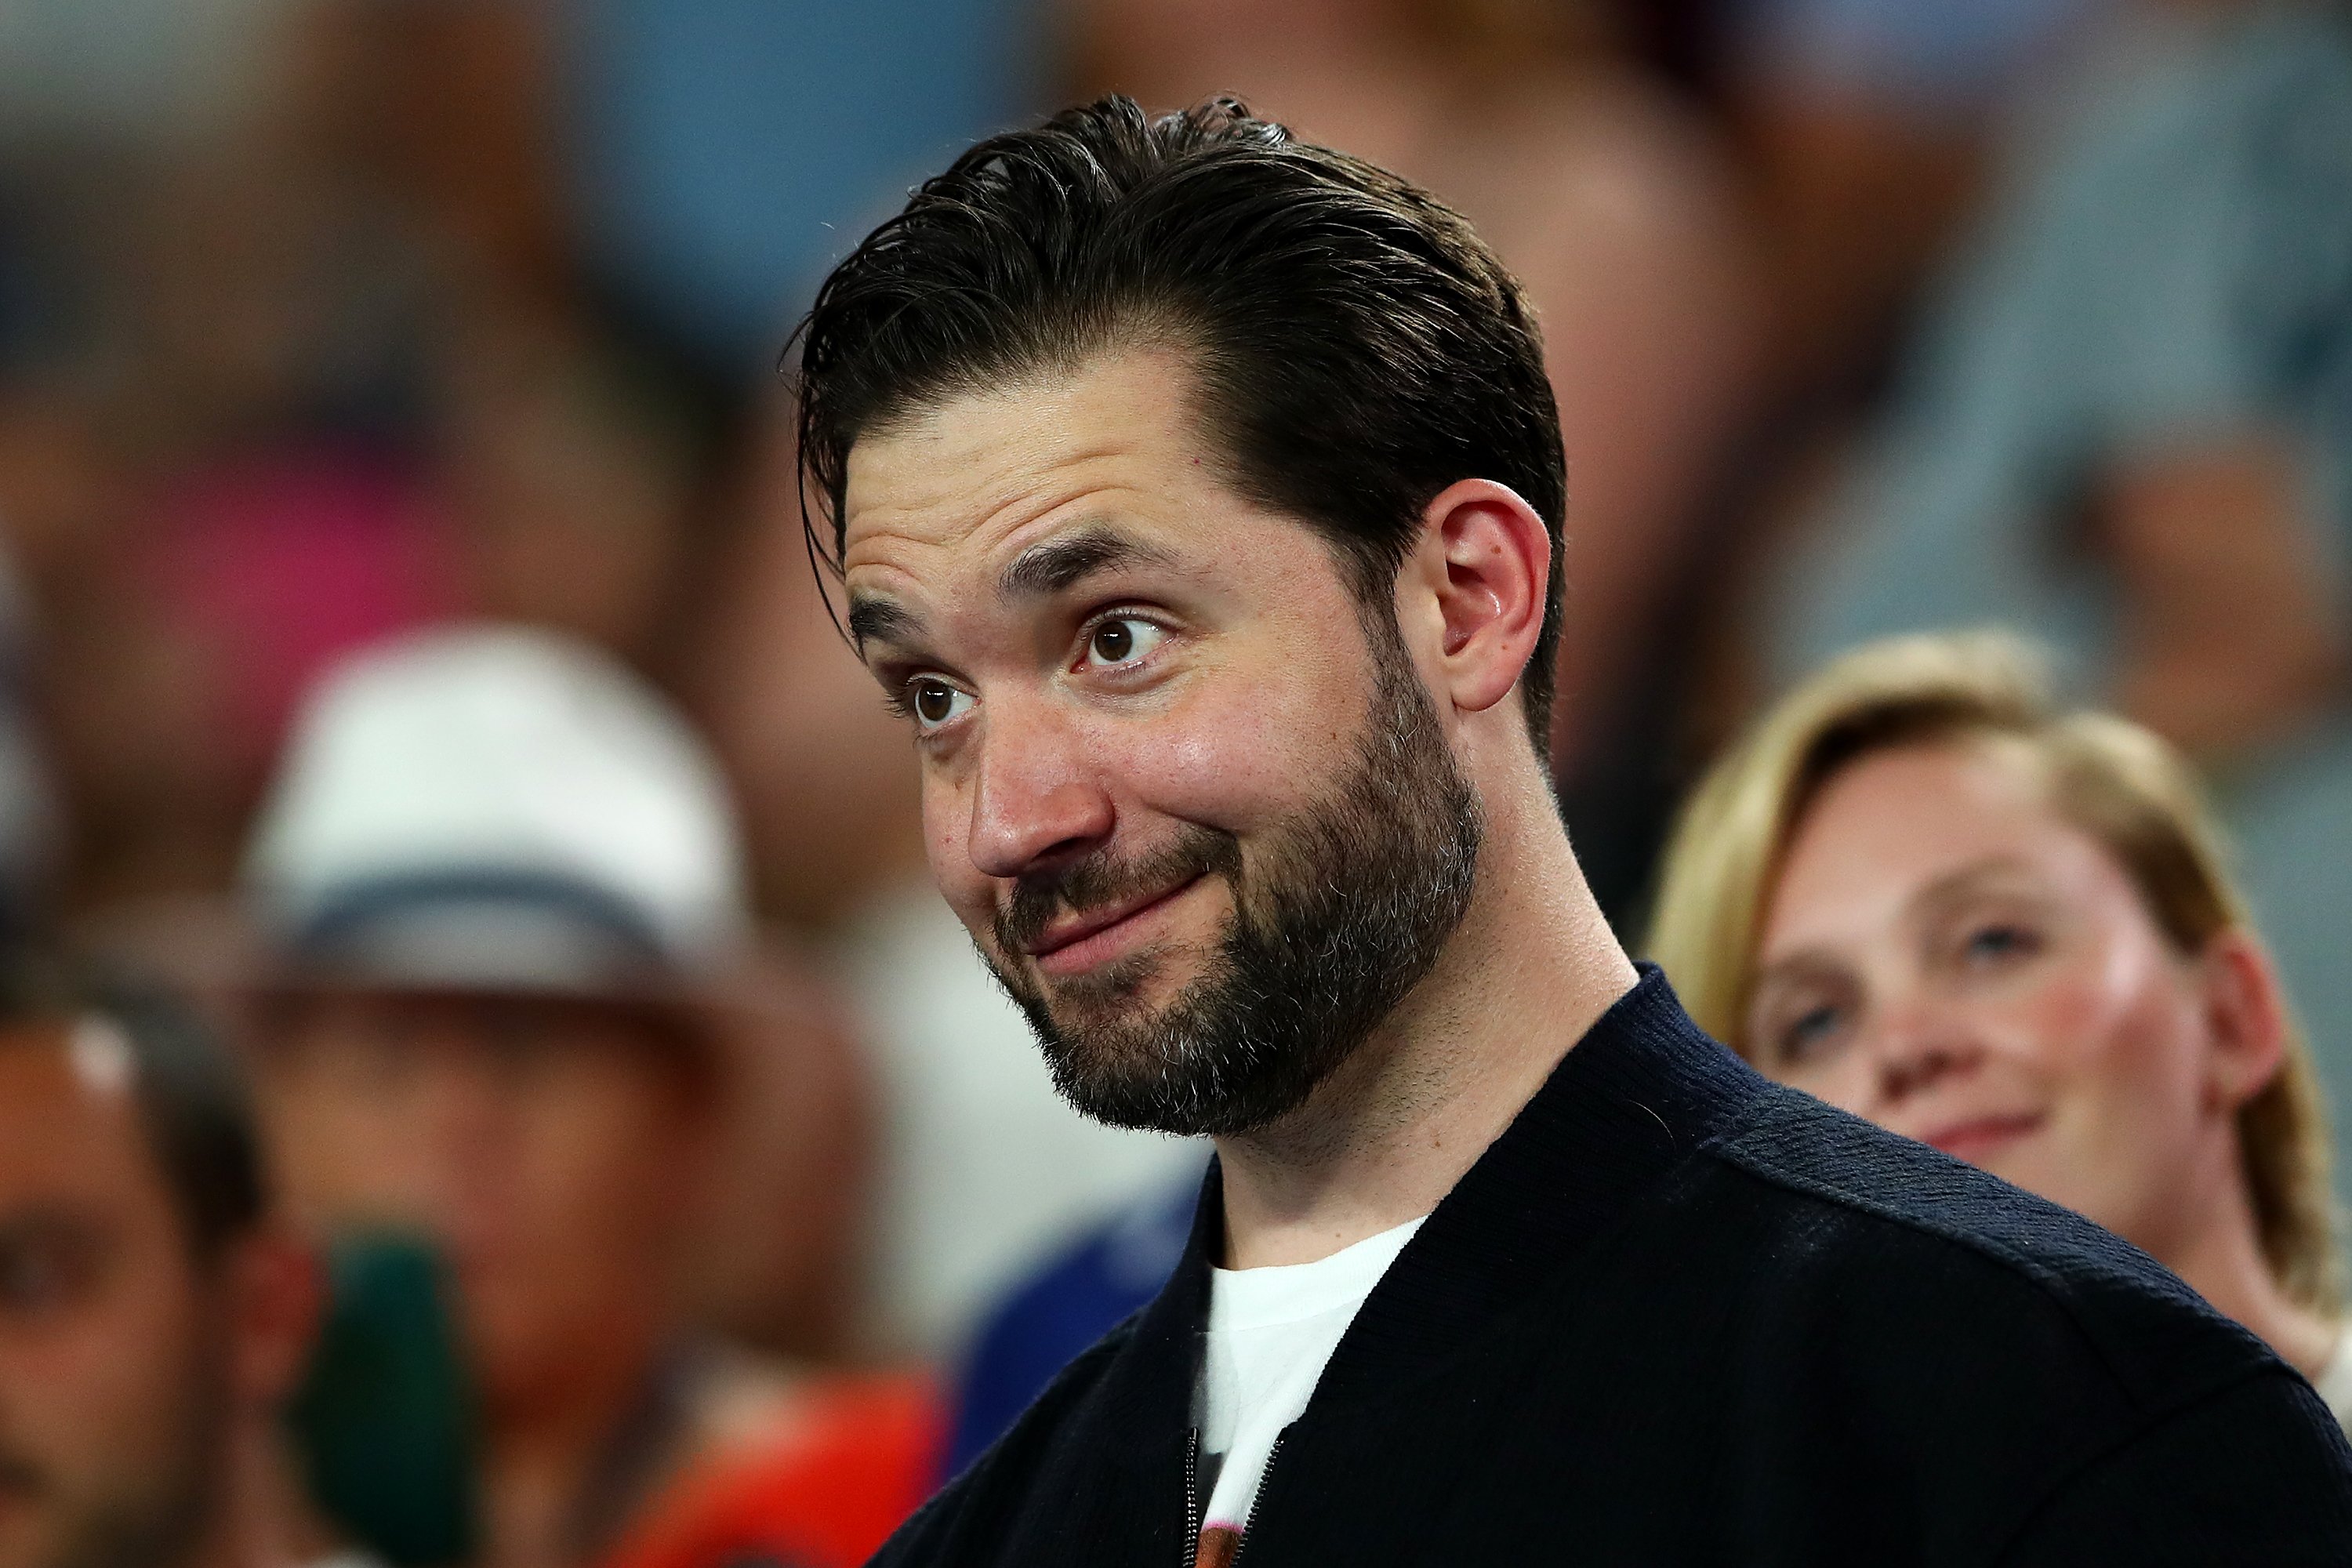 Alexis Ohanian at the Australian Open at Melbourne Park on January 17, 2019 | Photo: GettyImages